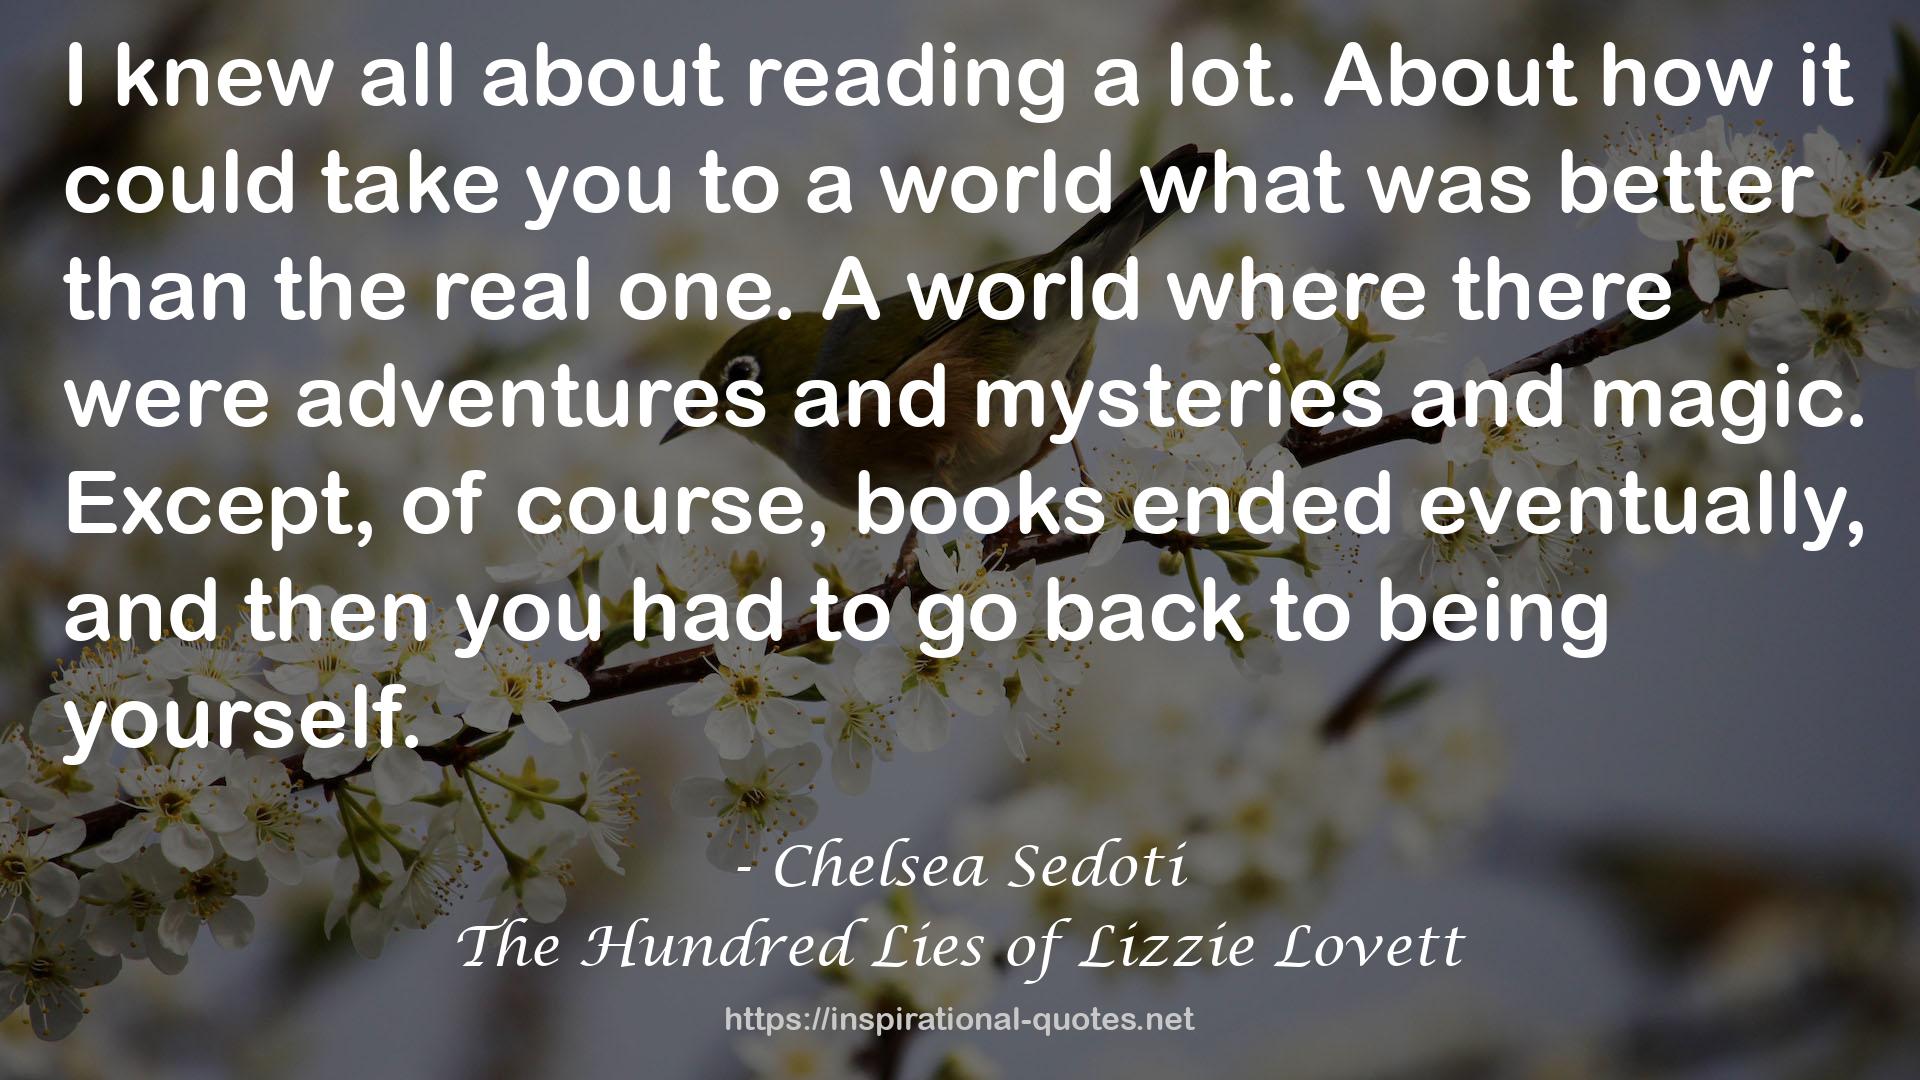 The Hundred Lies of Lizzie Lovett QUOTES